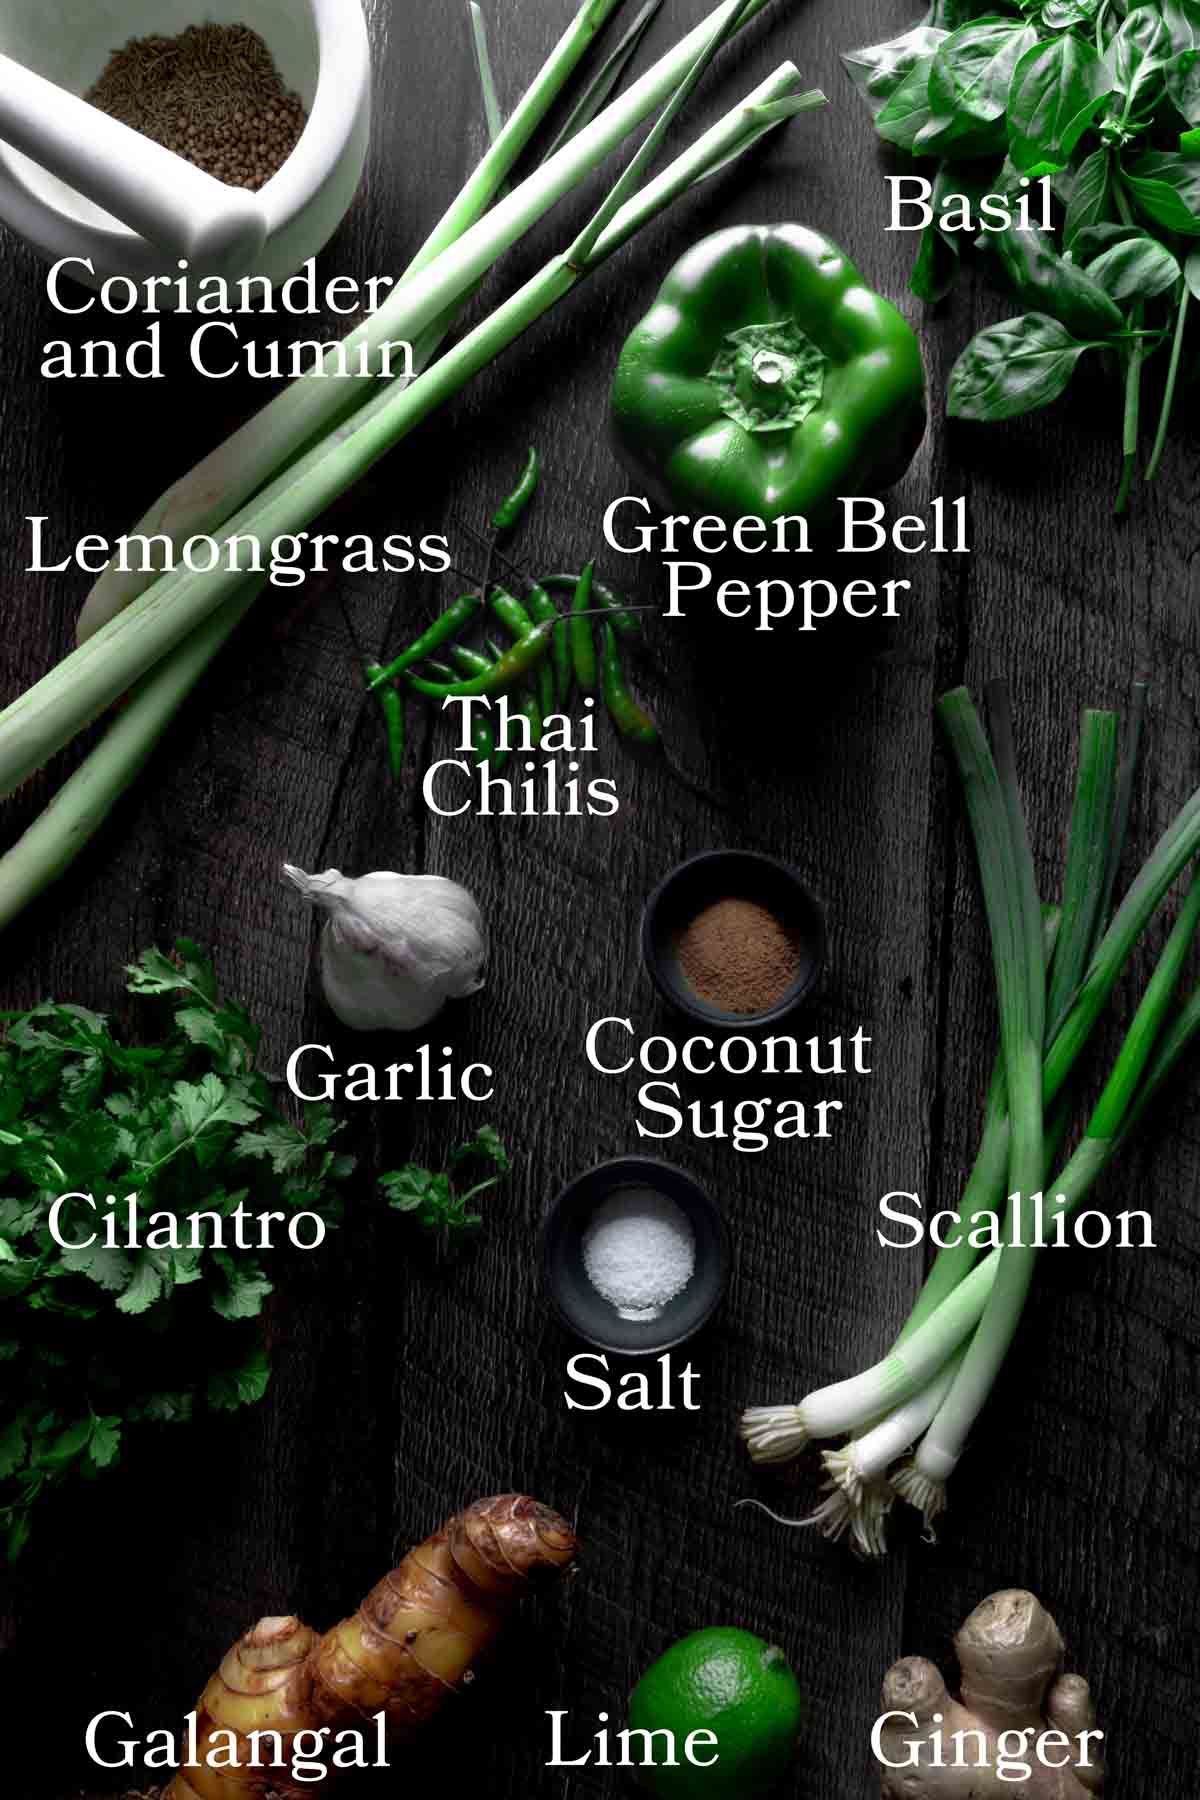 This photo shows all the ingredients needed to make the easy, vegan Thai green curry recipe with labels